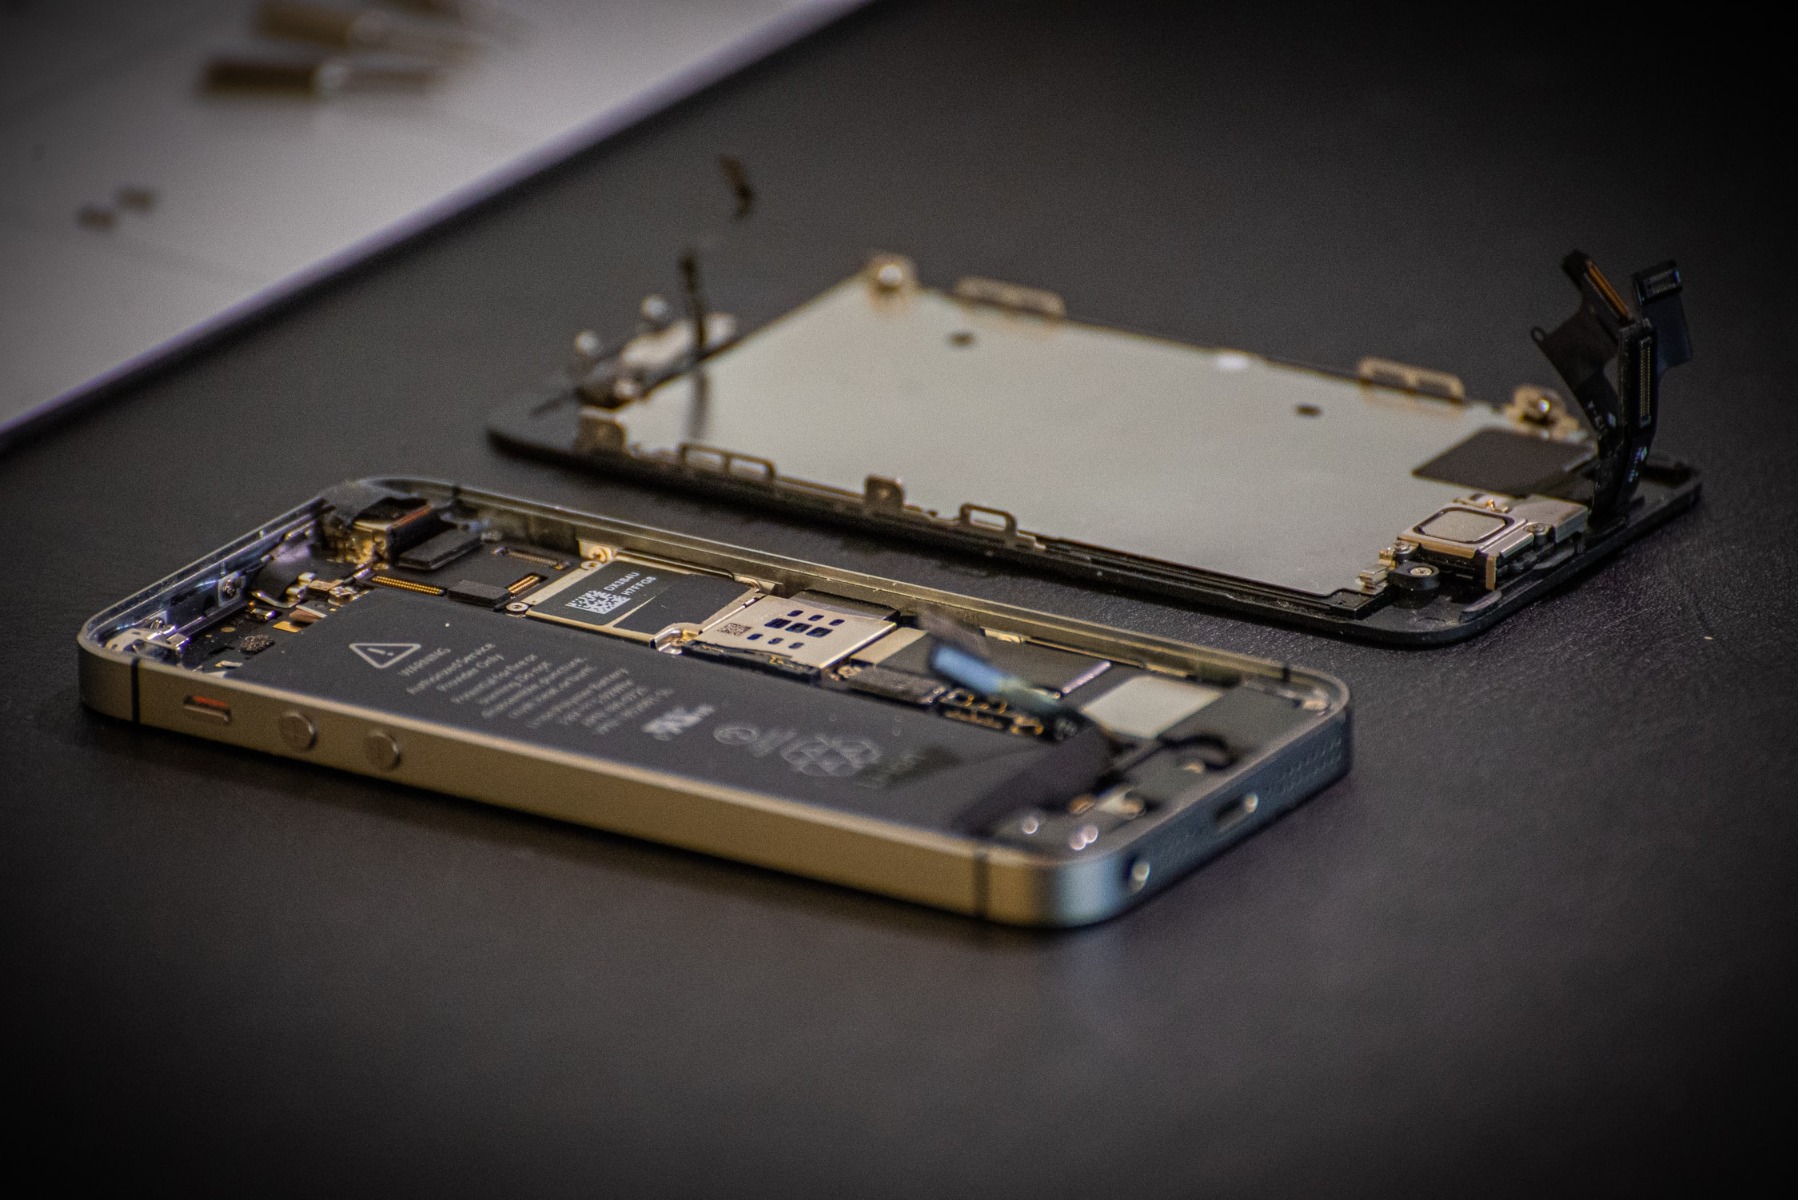 The internal parts of a phone